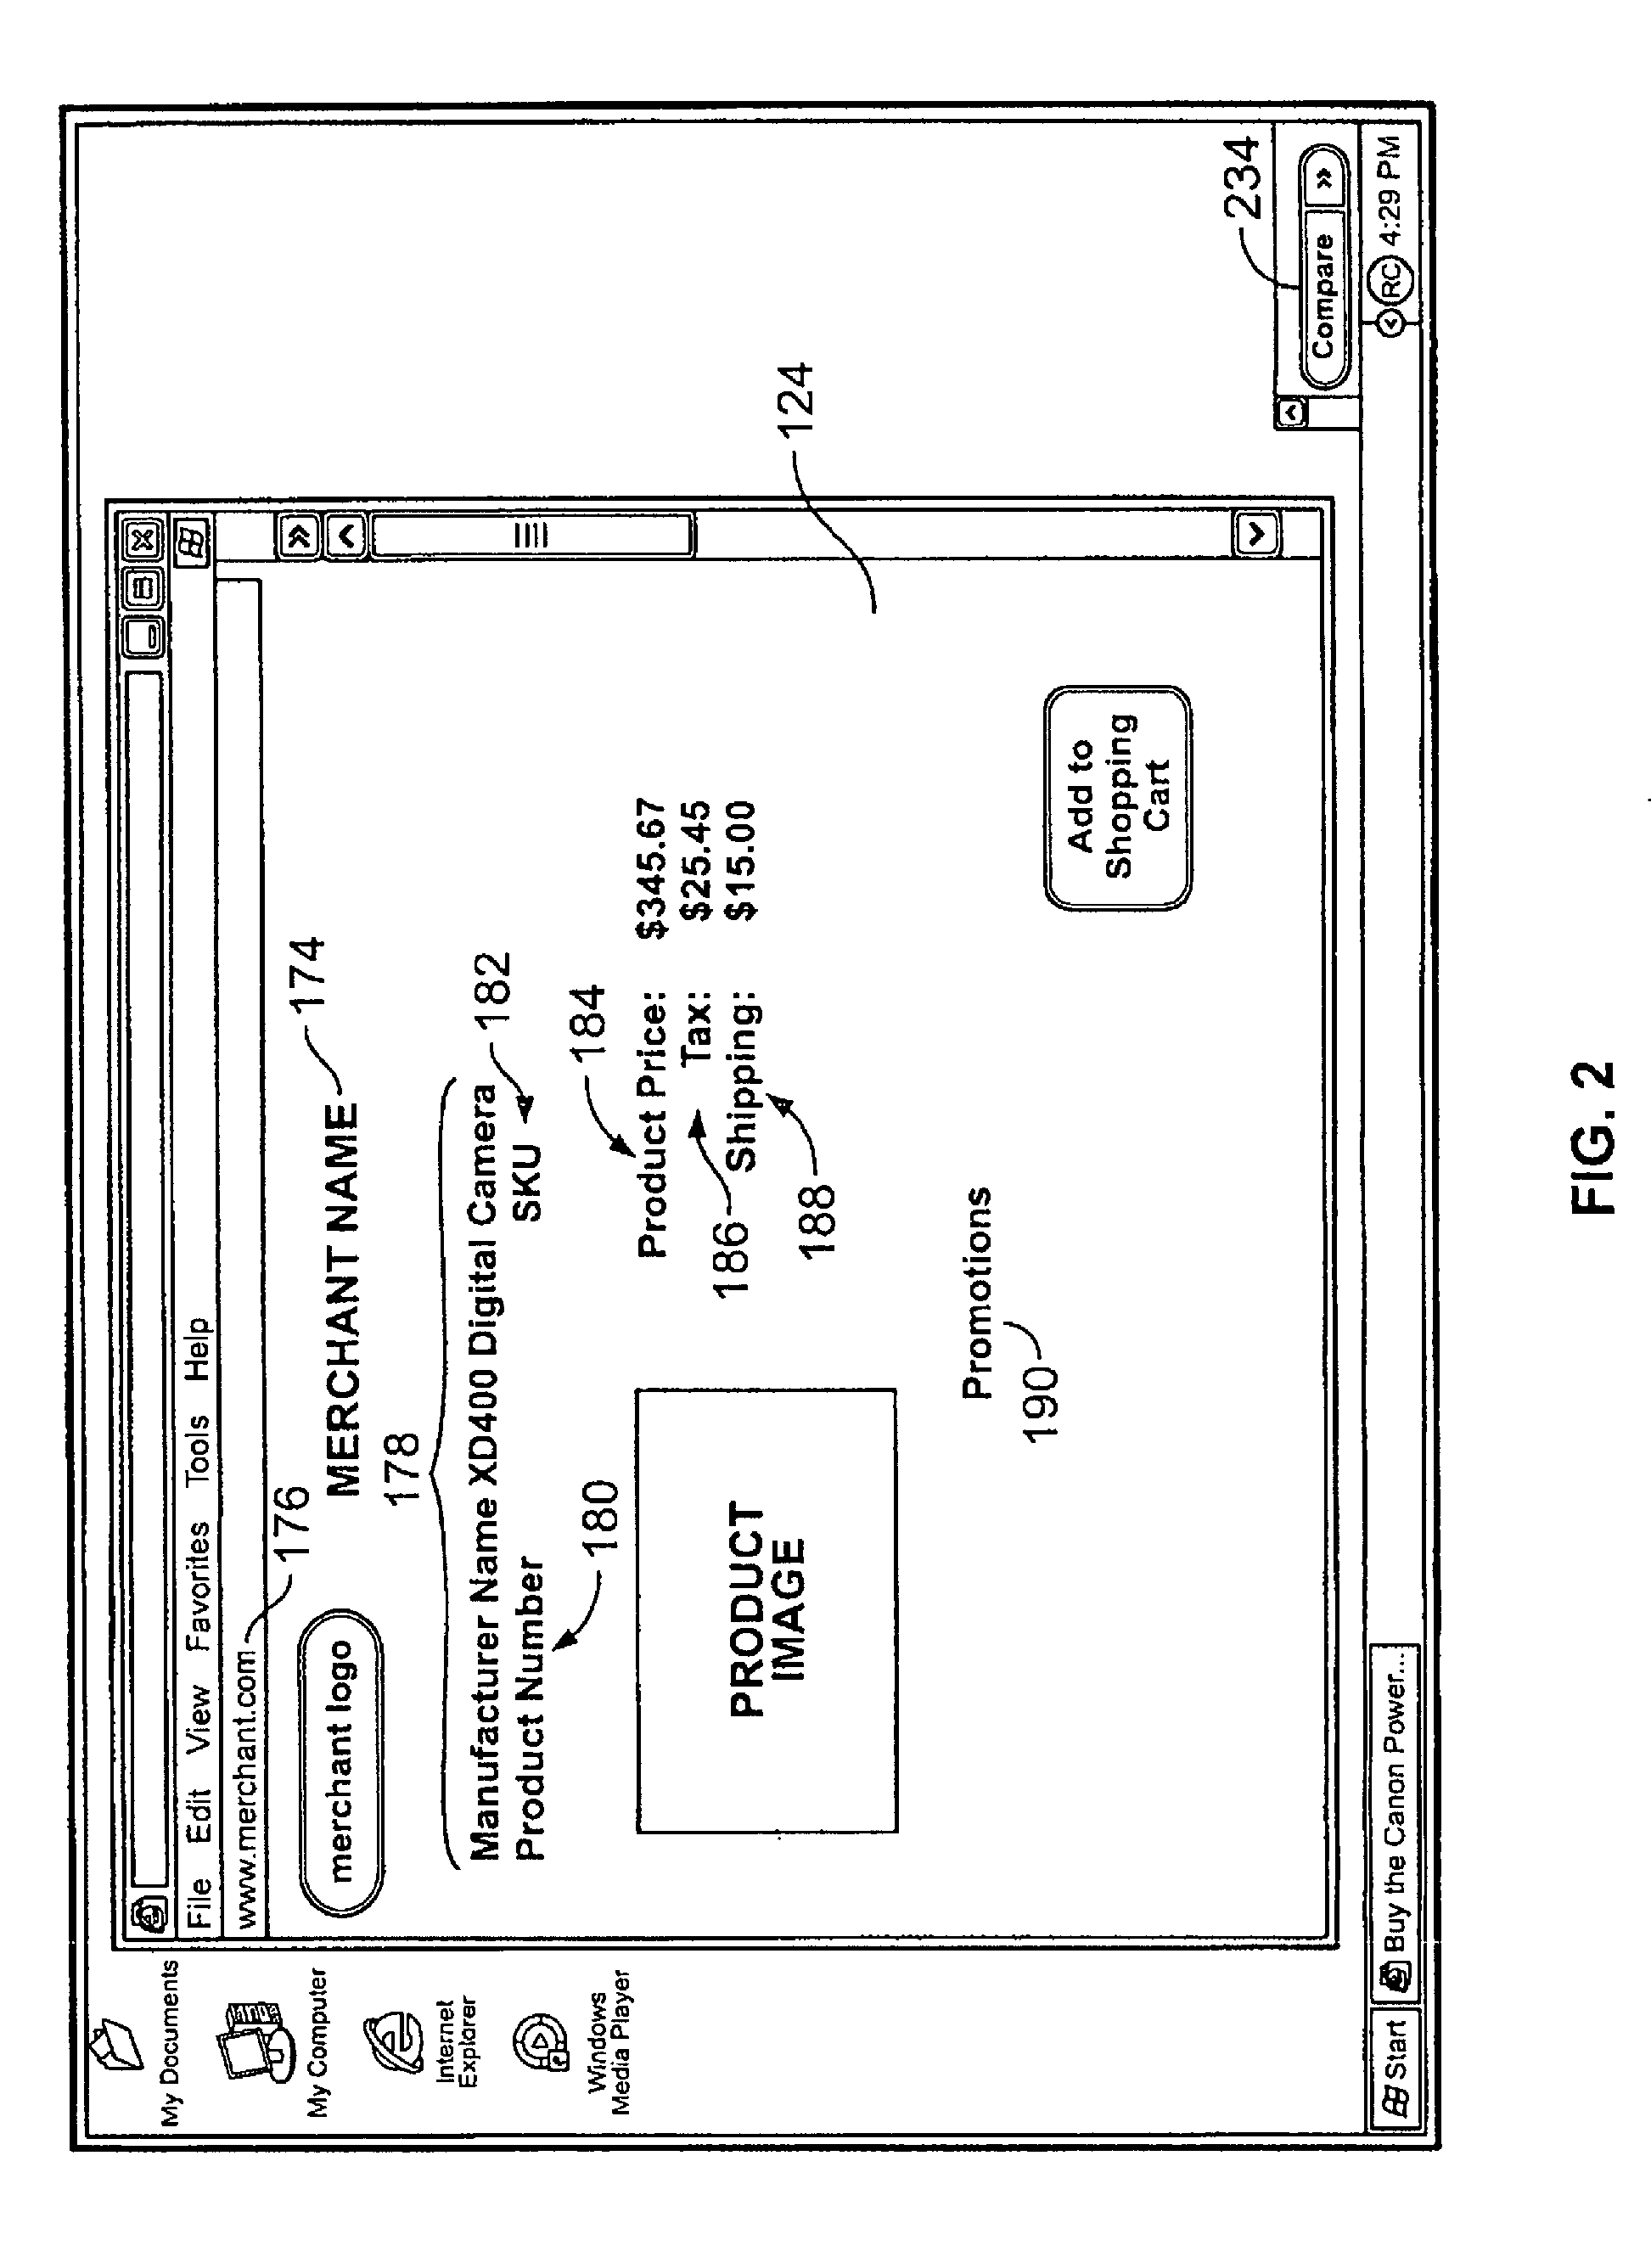 Method and system for identifying targeted data on a web page